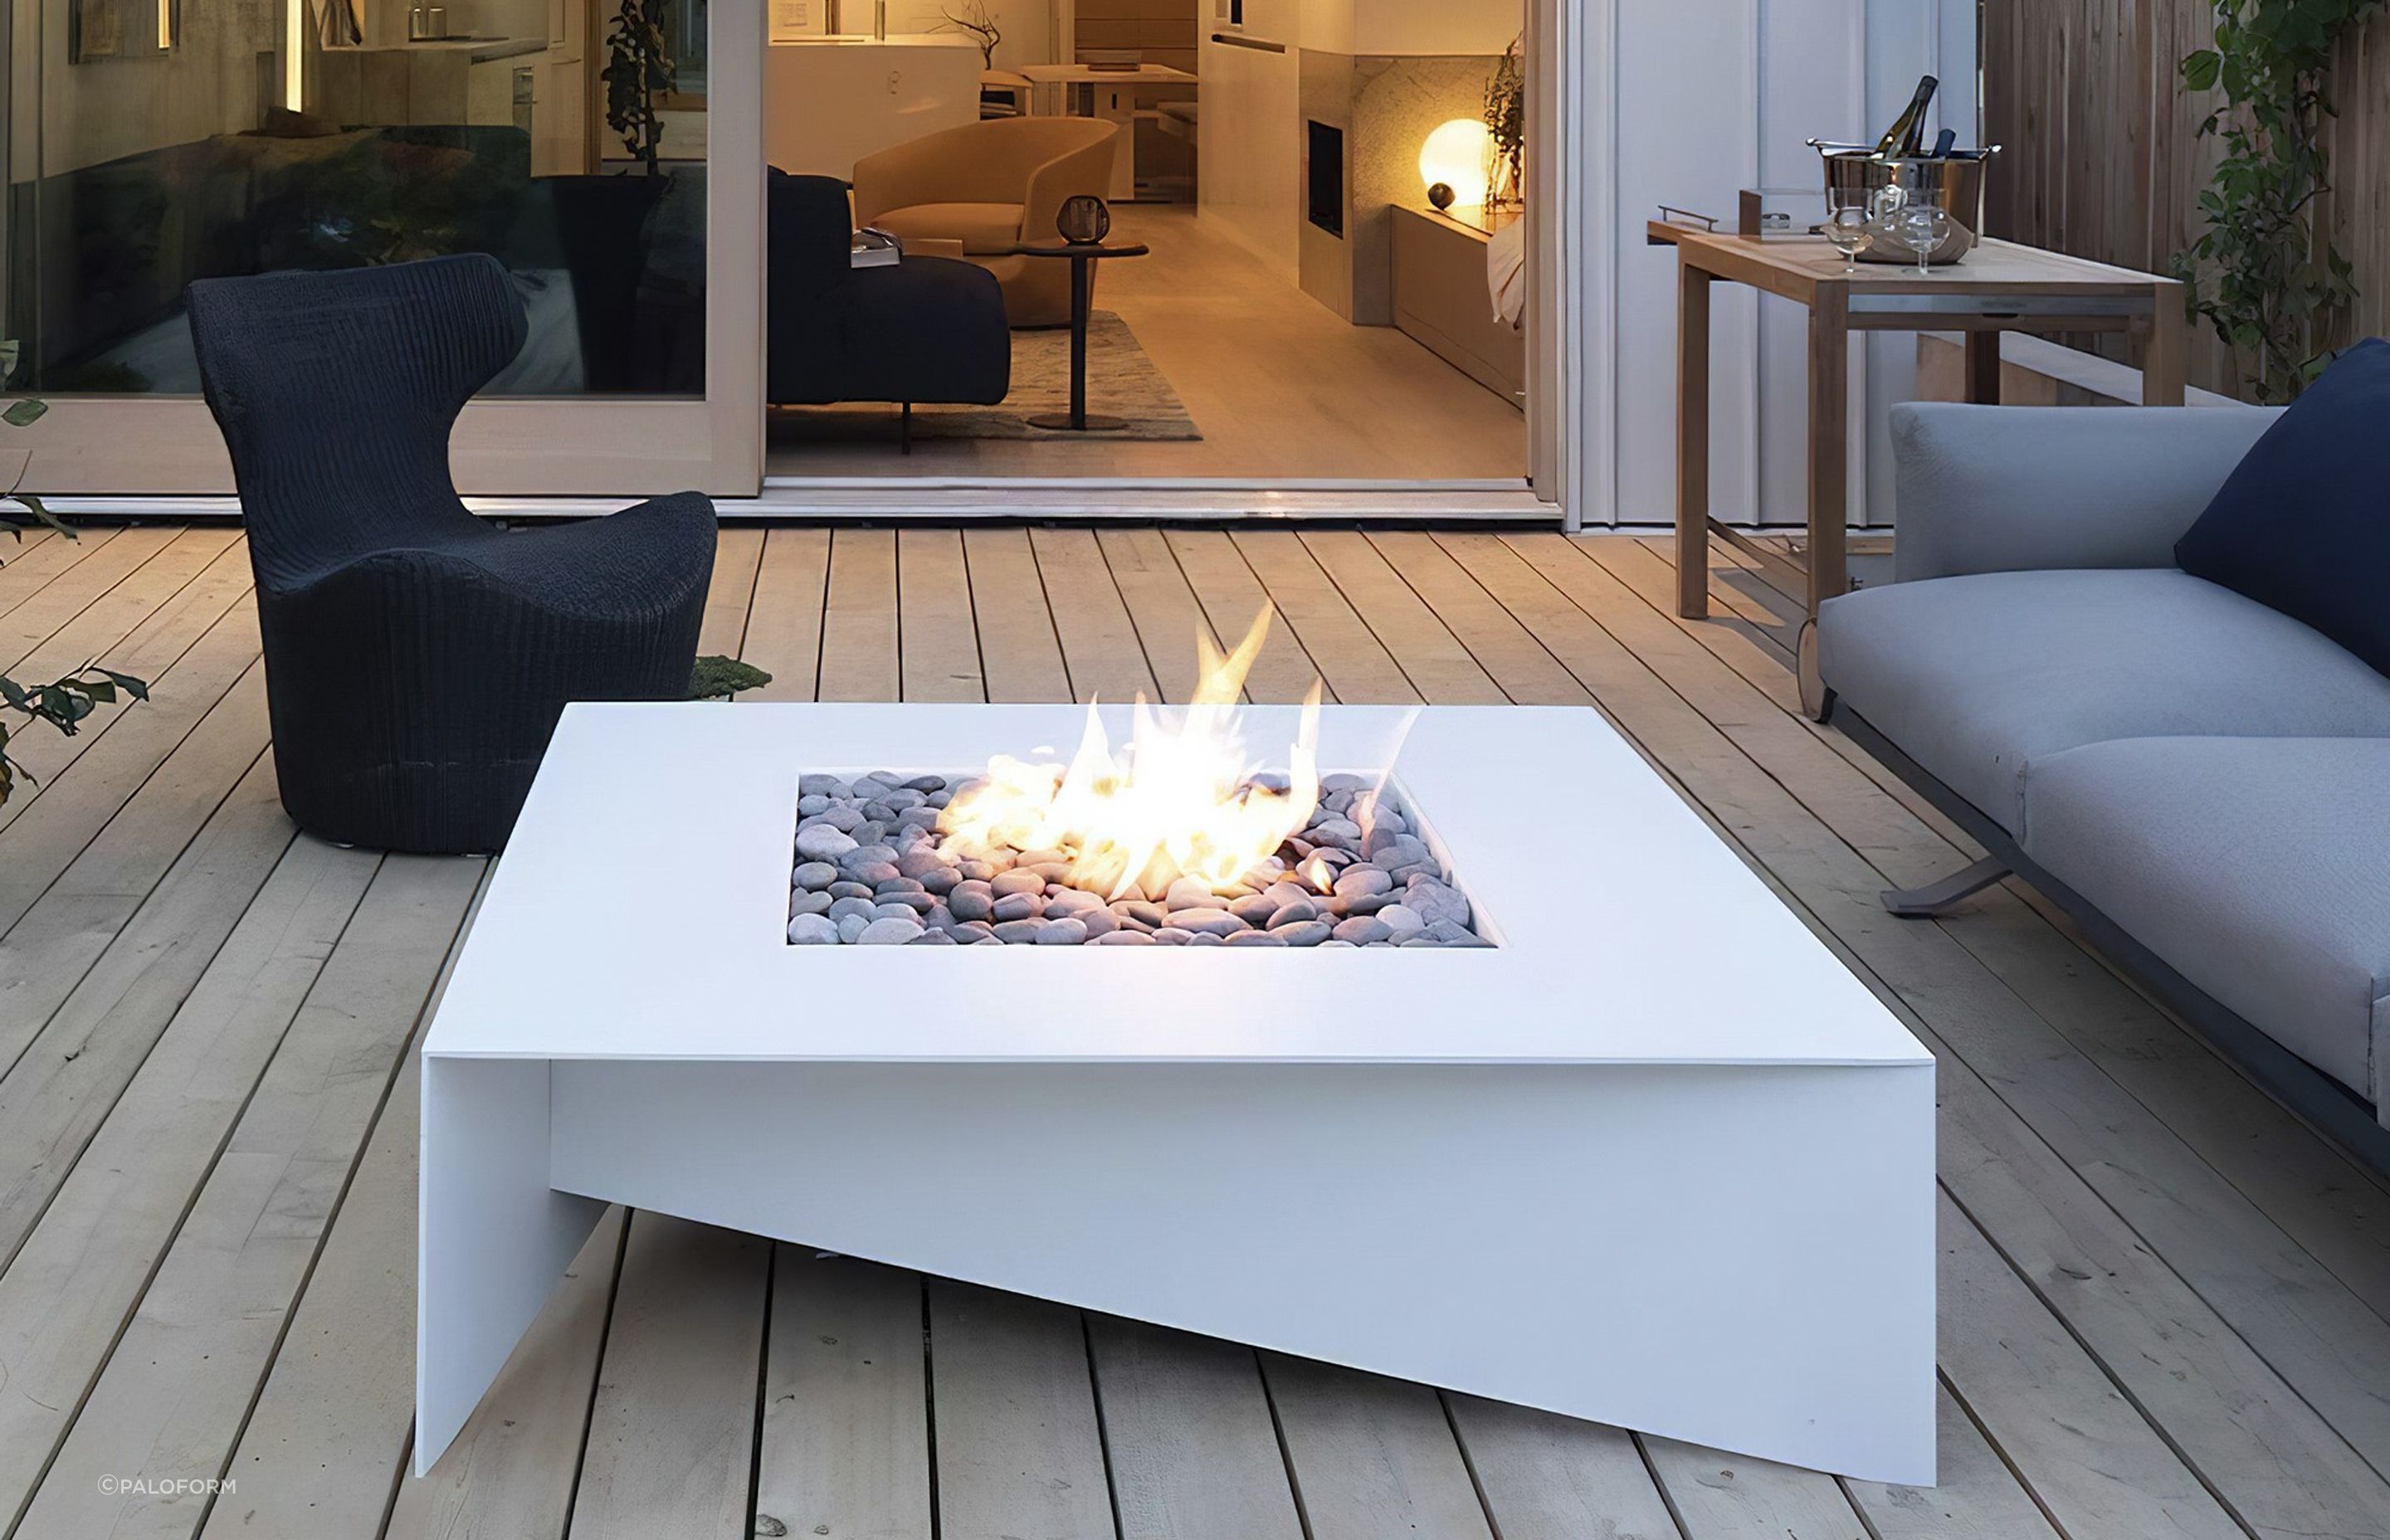 The drama of a fire pit, like the Fold Fire Table, is hard to top